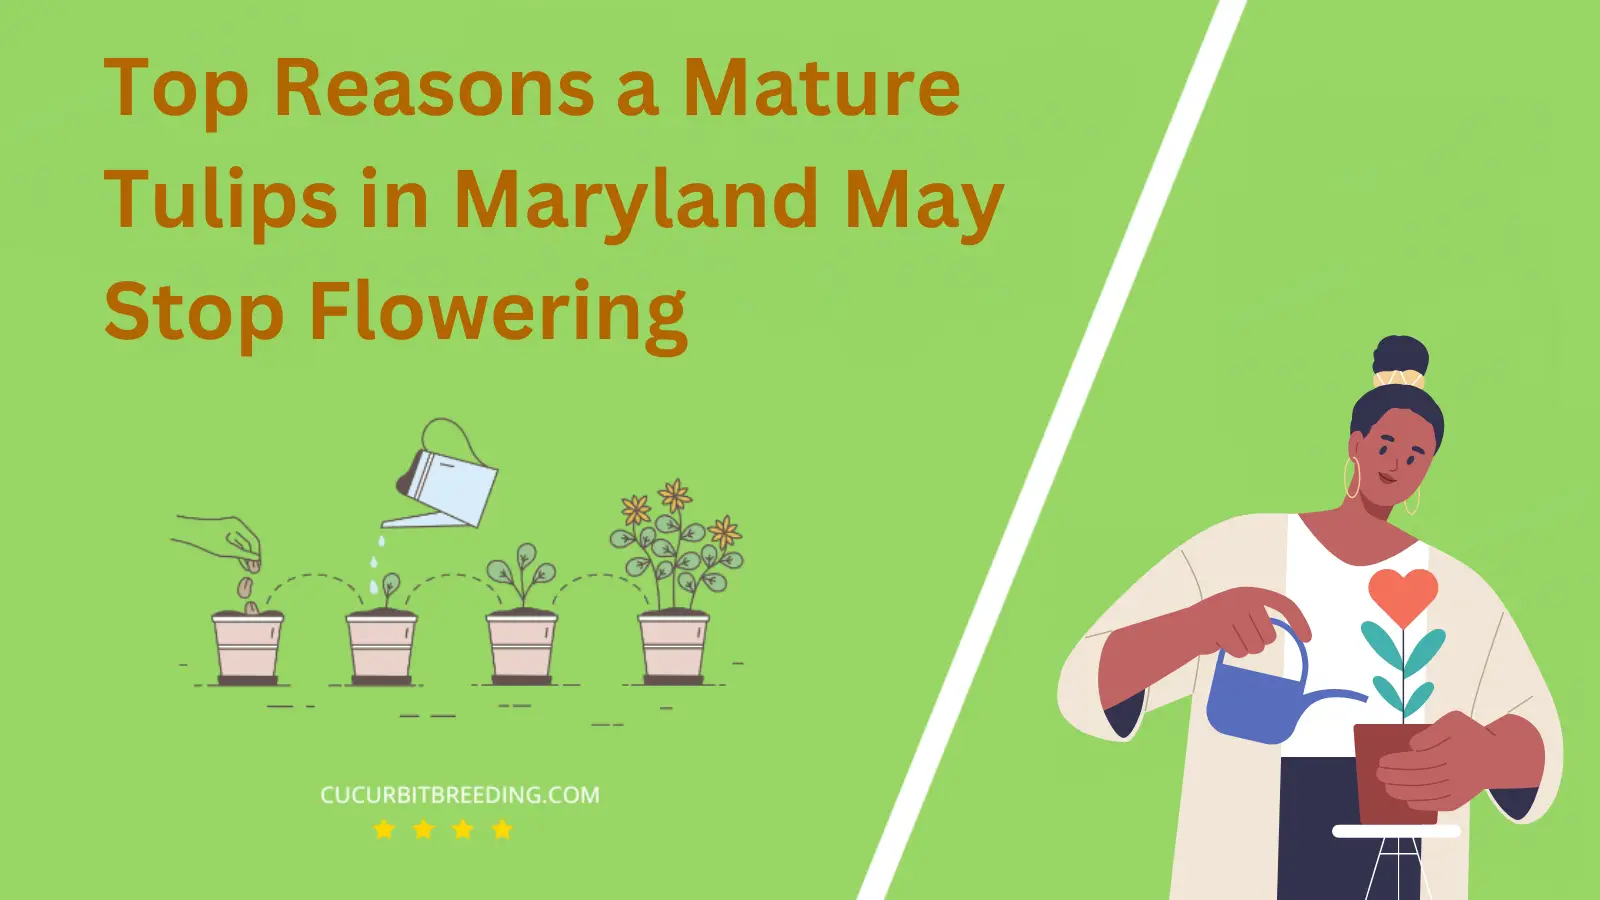 Top Reasons a Mature Tulips in Maryland May Stop Flowering